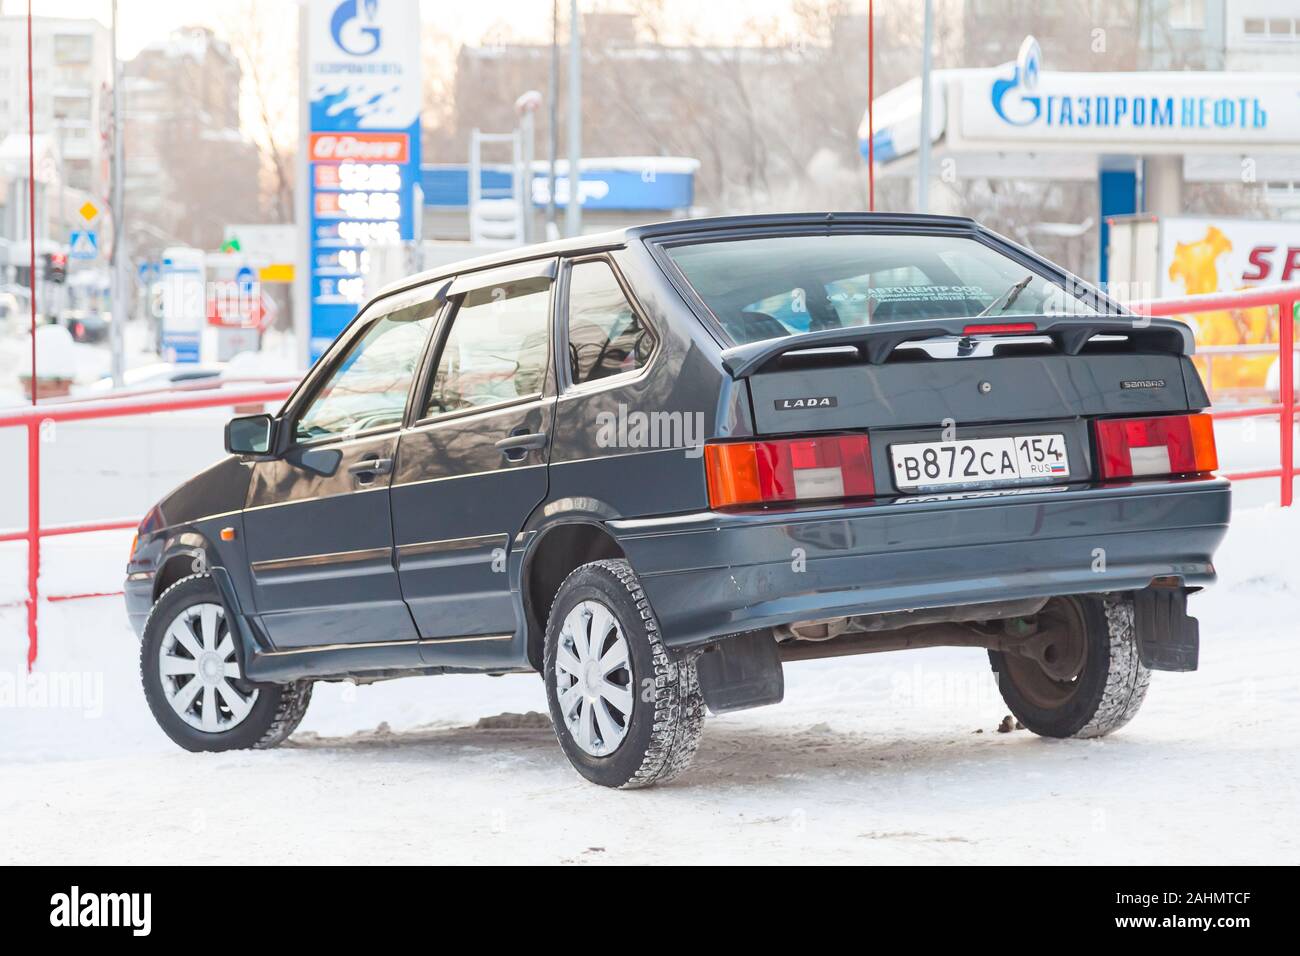 Novosibirsk, Russia - 12.27.2019: Green lada 2114 year front view with dark gray interior in excellent condition in a parking space among other cars Stock Photo